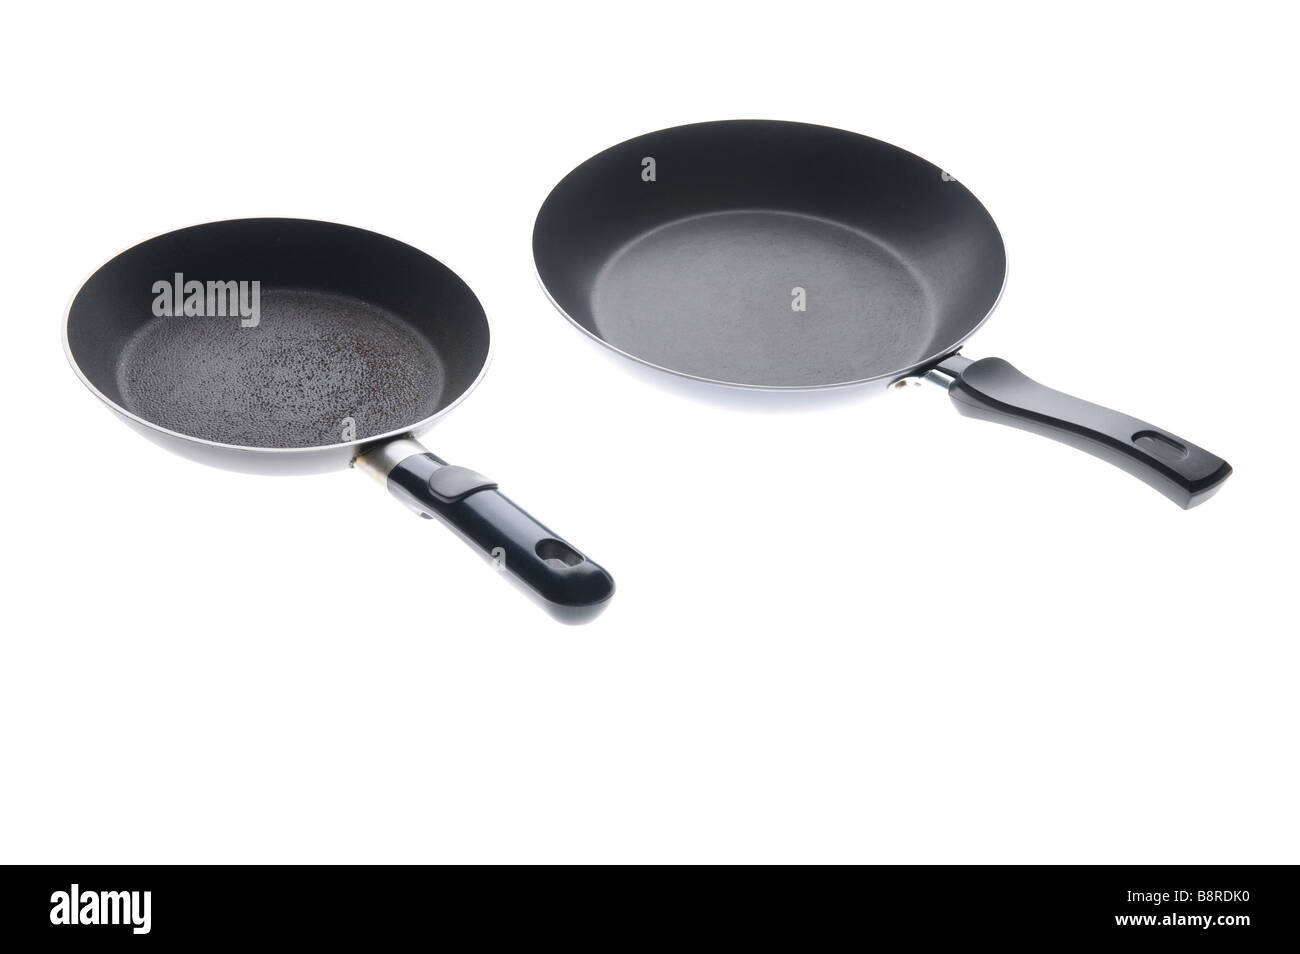 object on white kitchen utensil griddle Stock Photo